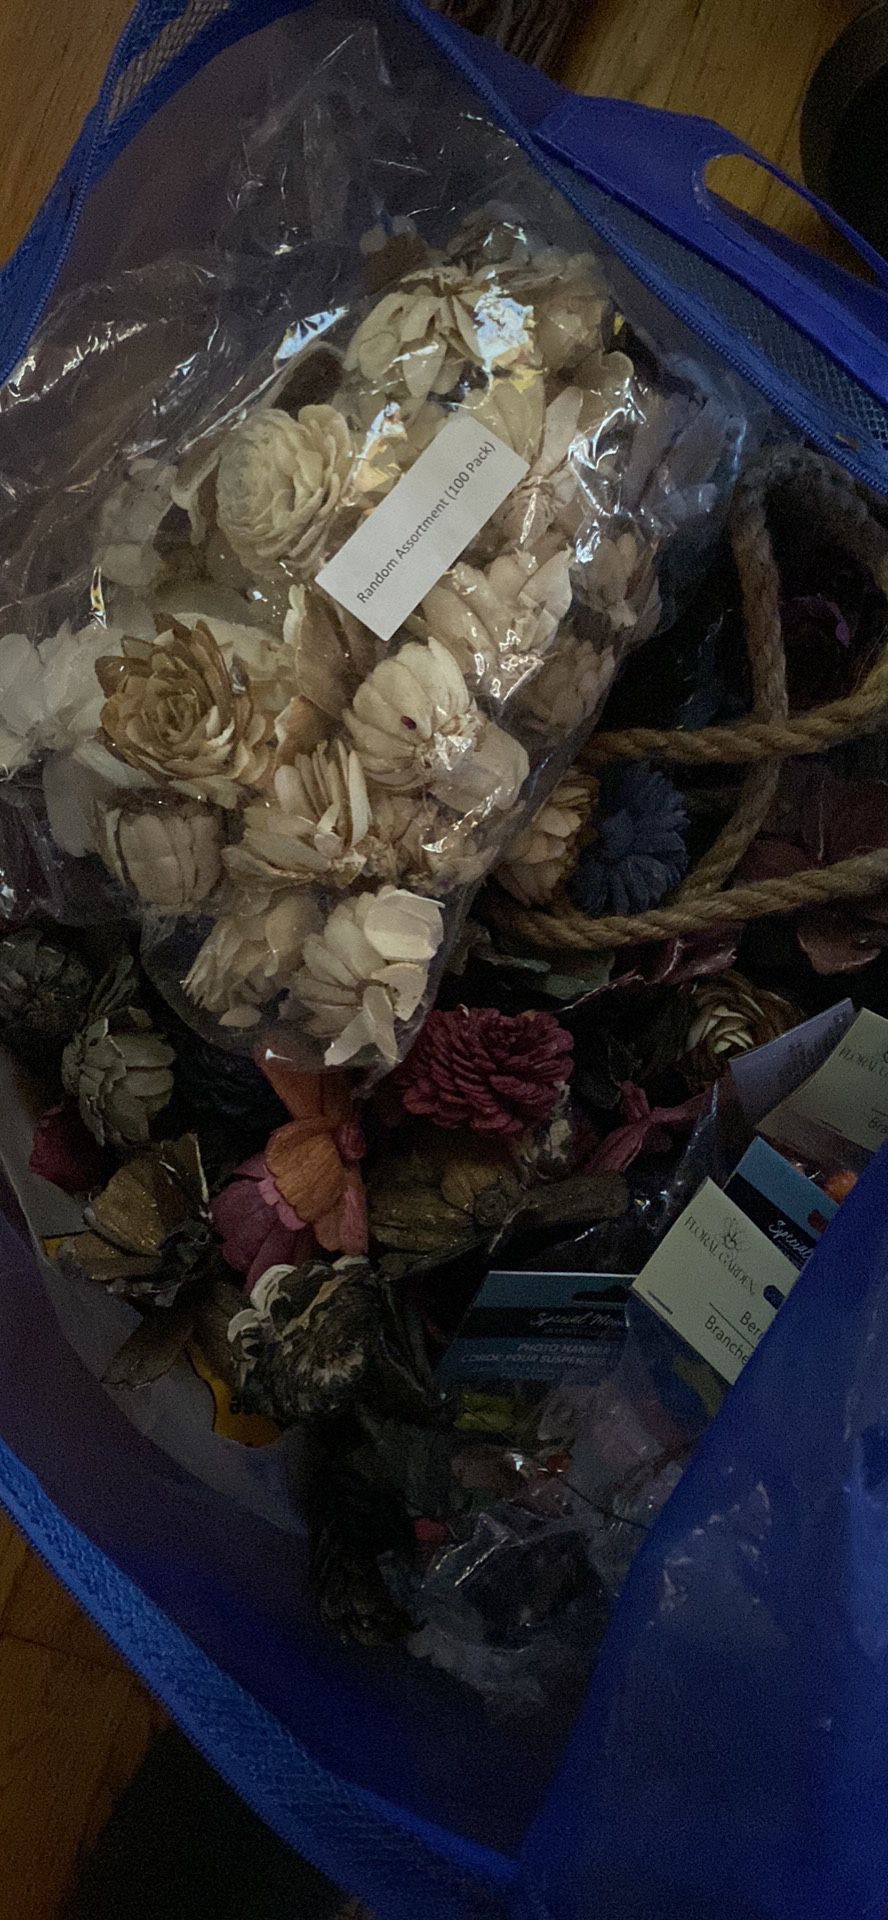 Sola Wood Flowers 350 And Other Assorted Wedding Decor 